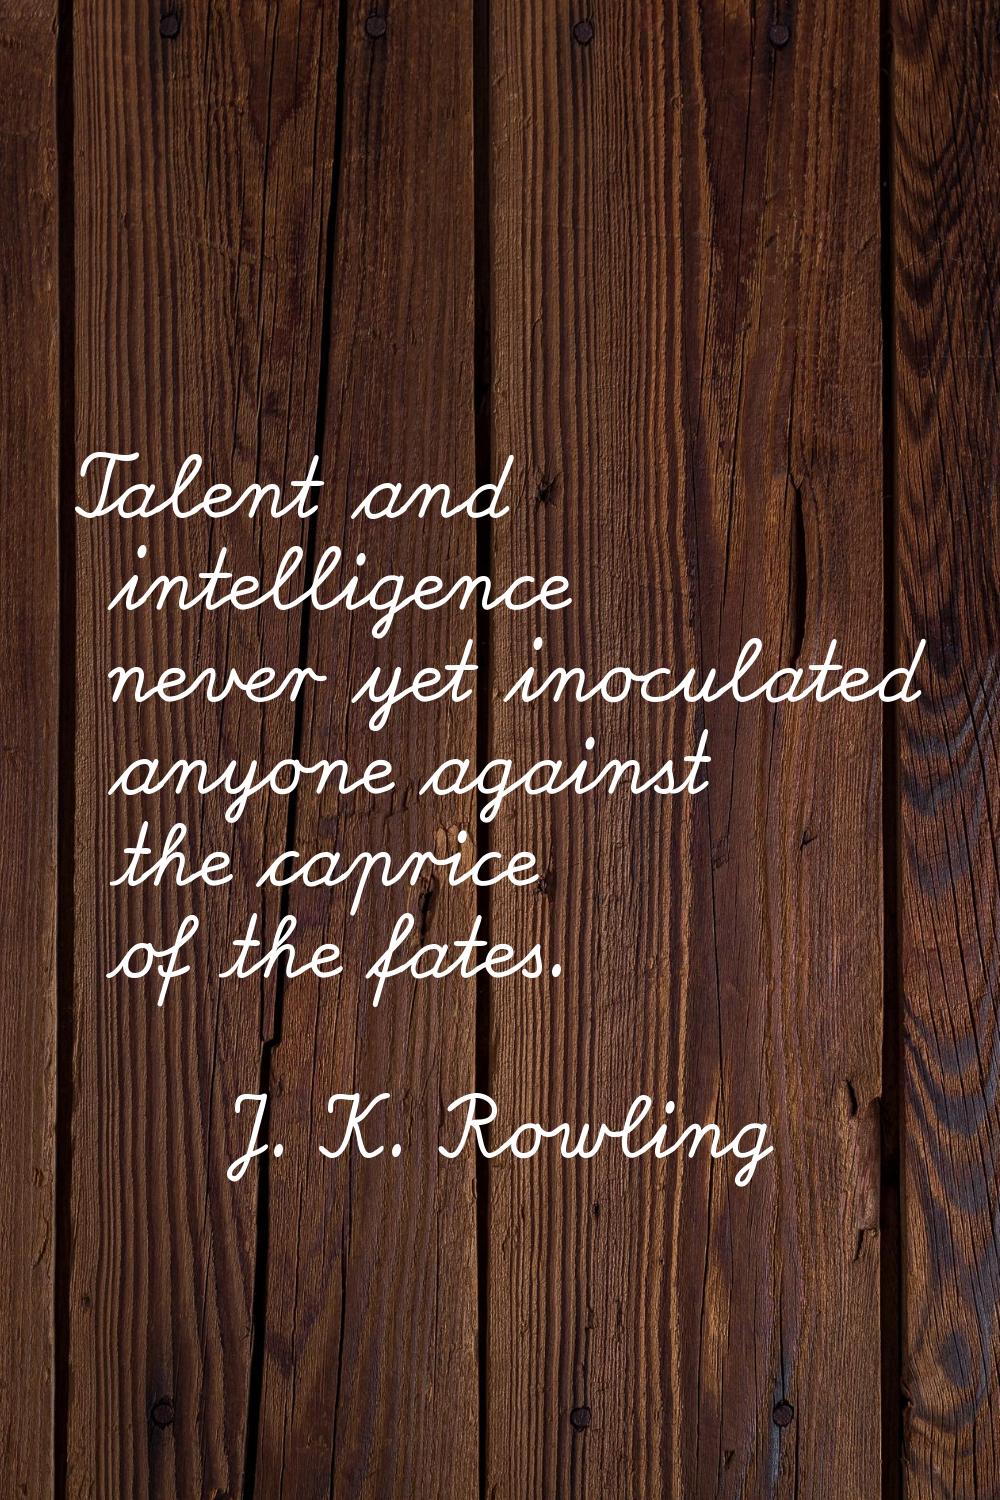 Talent and intelligence never yet inoculated anyone against the caprice of the fates.